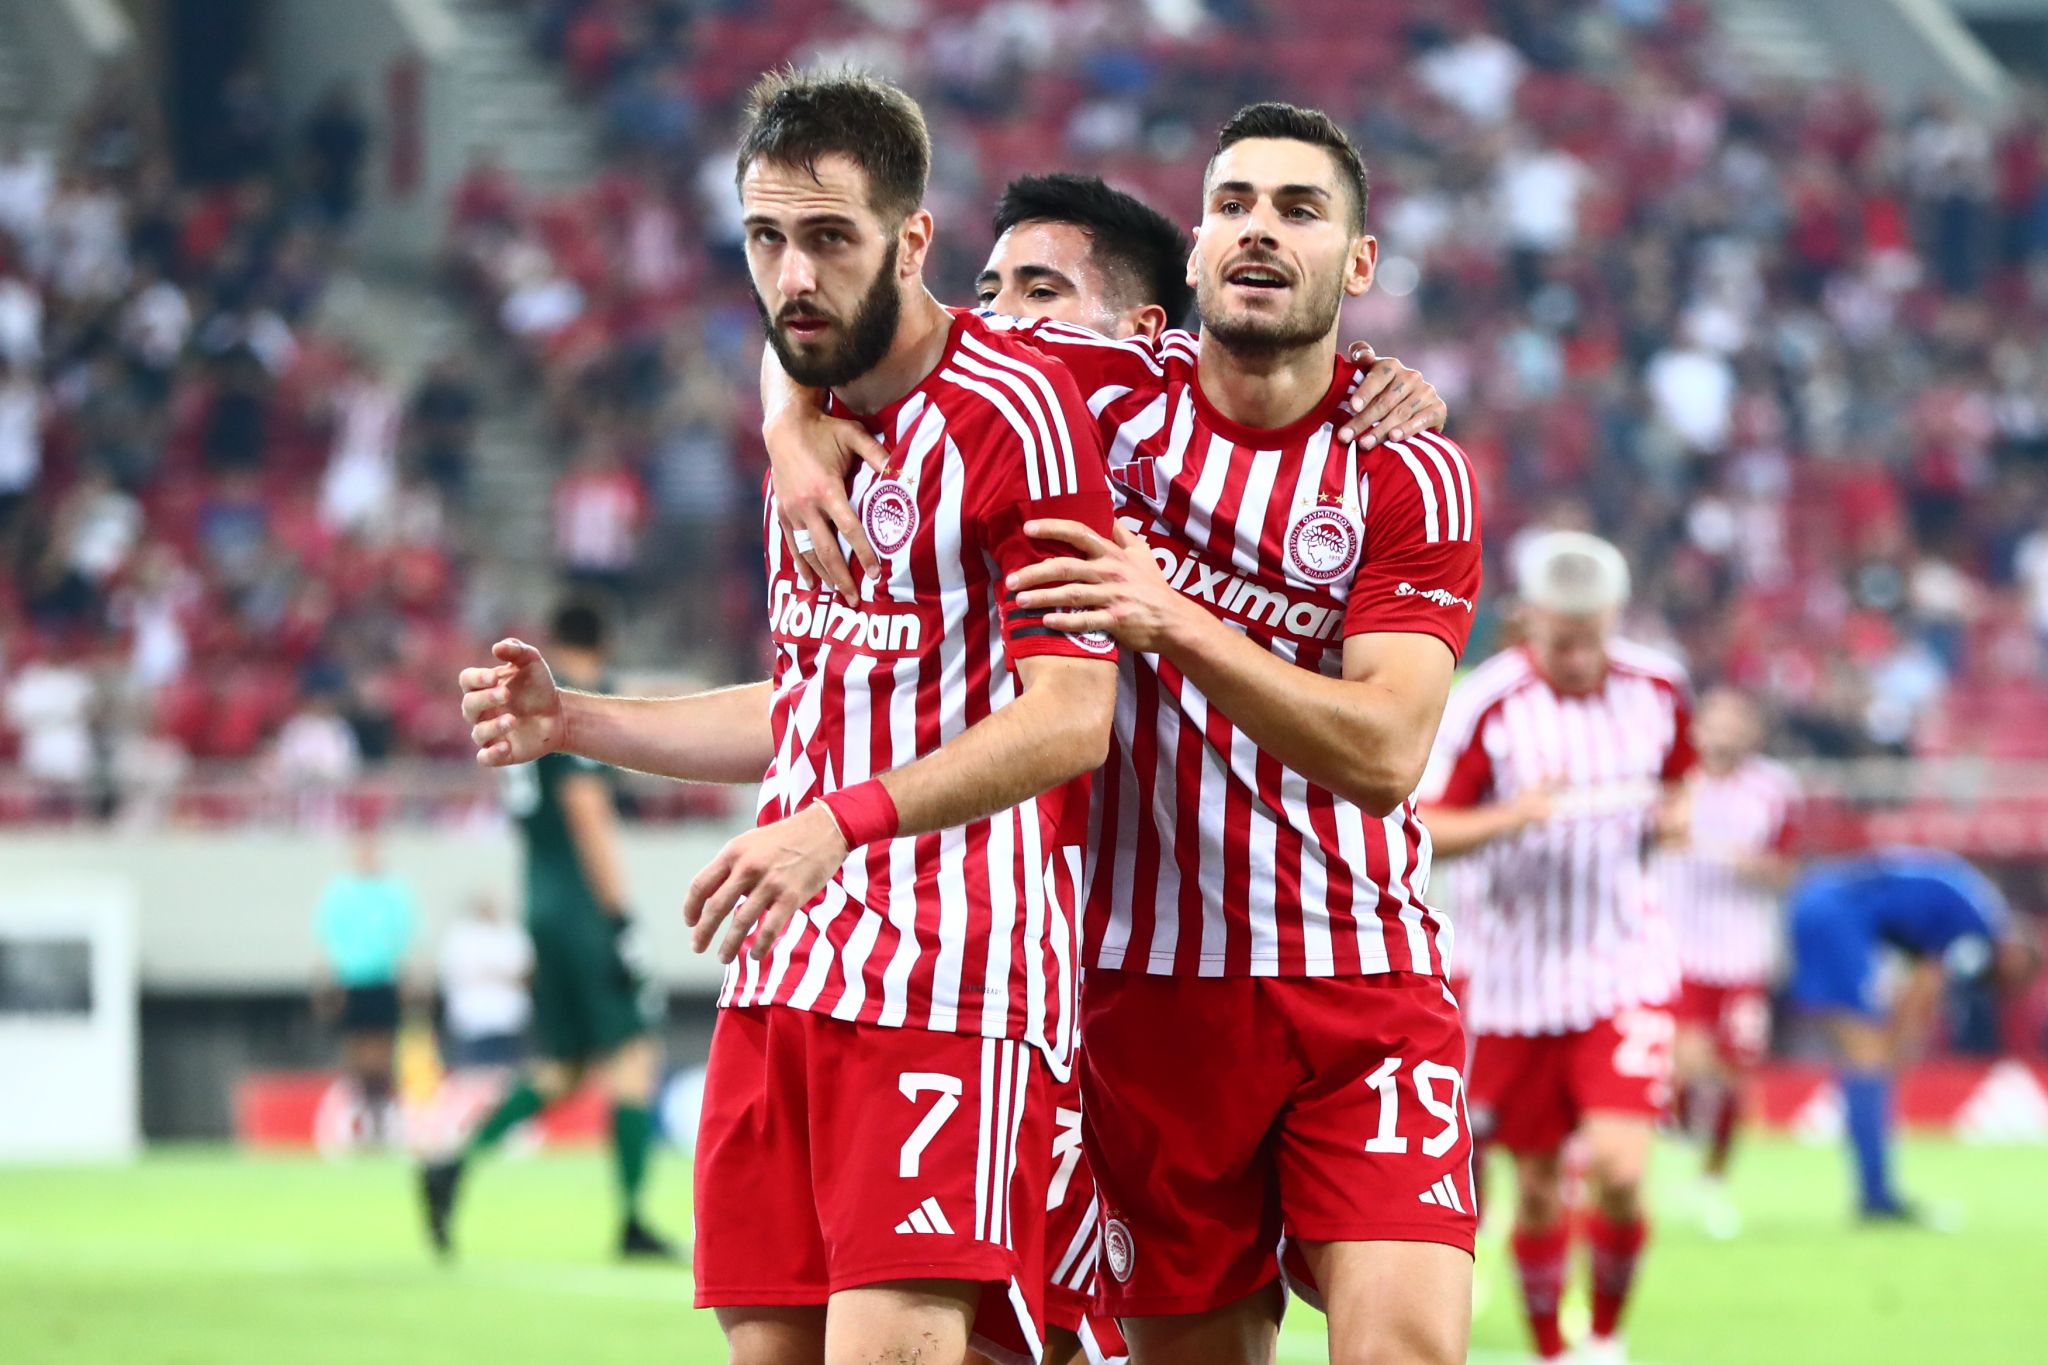 A ‘haul’ by Olympiacos for the three in a row